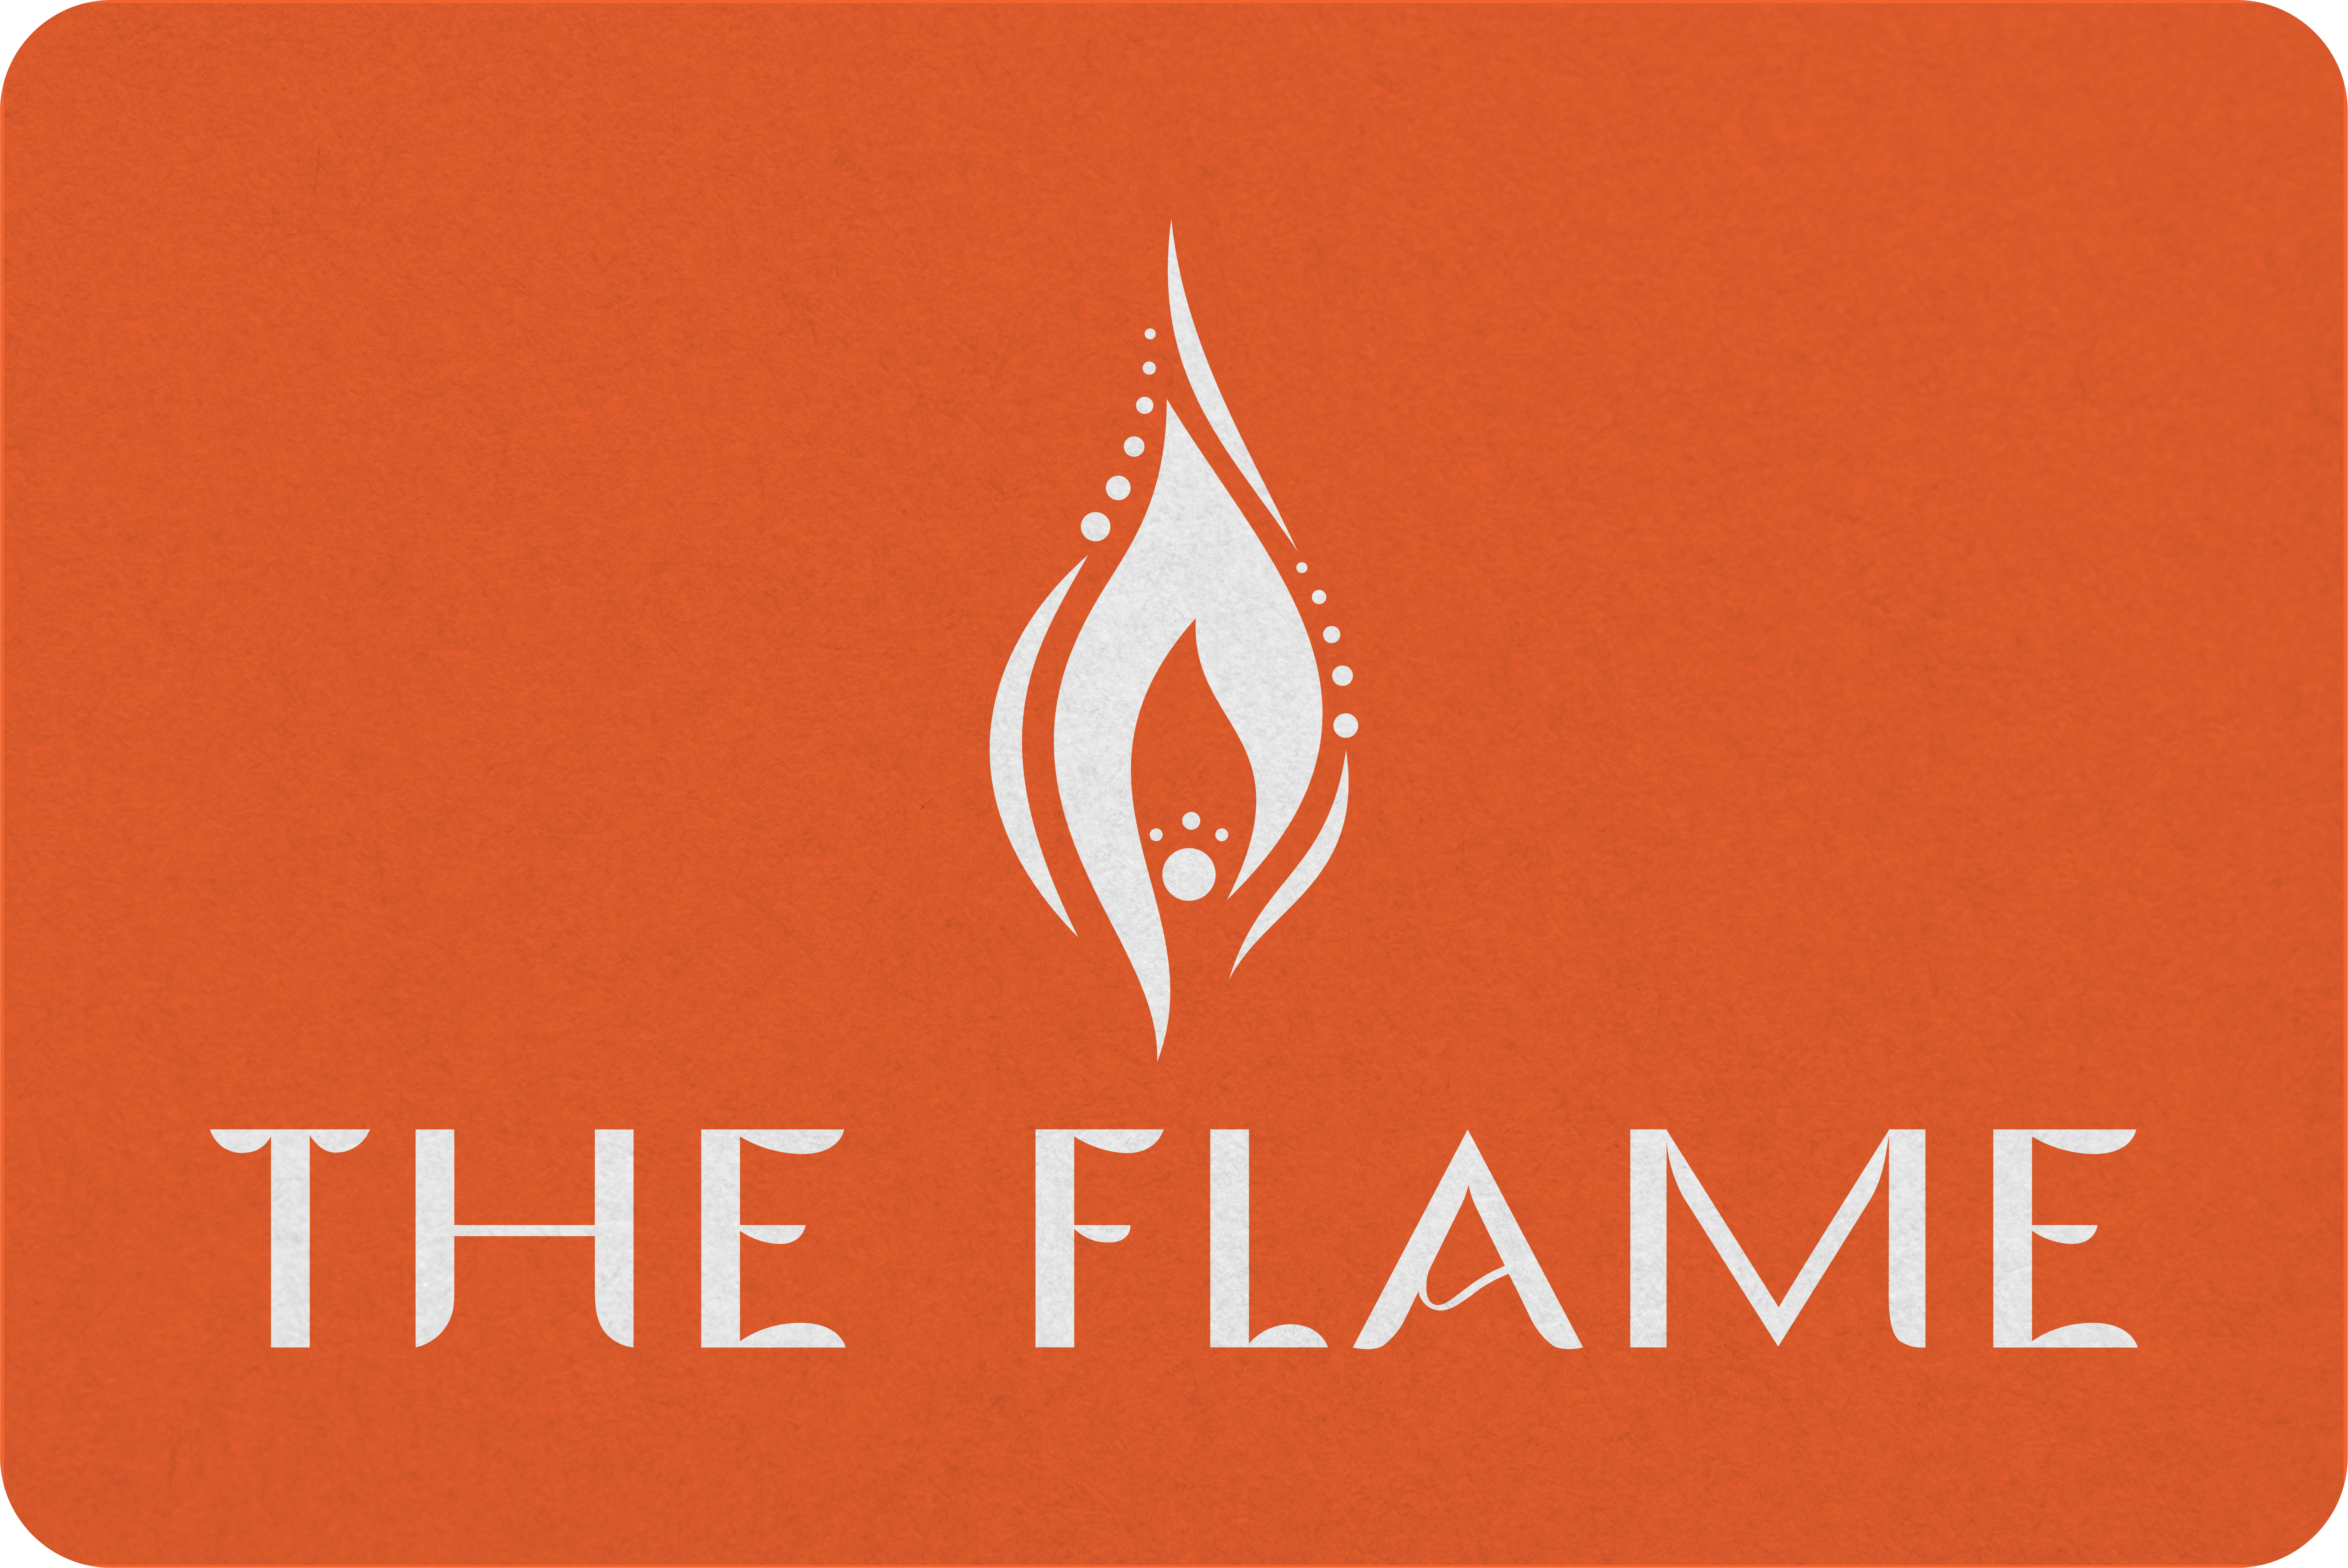 The Flame Case Study